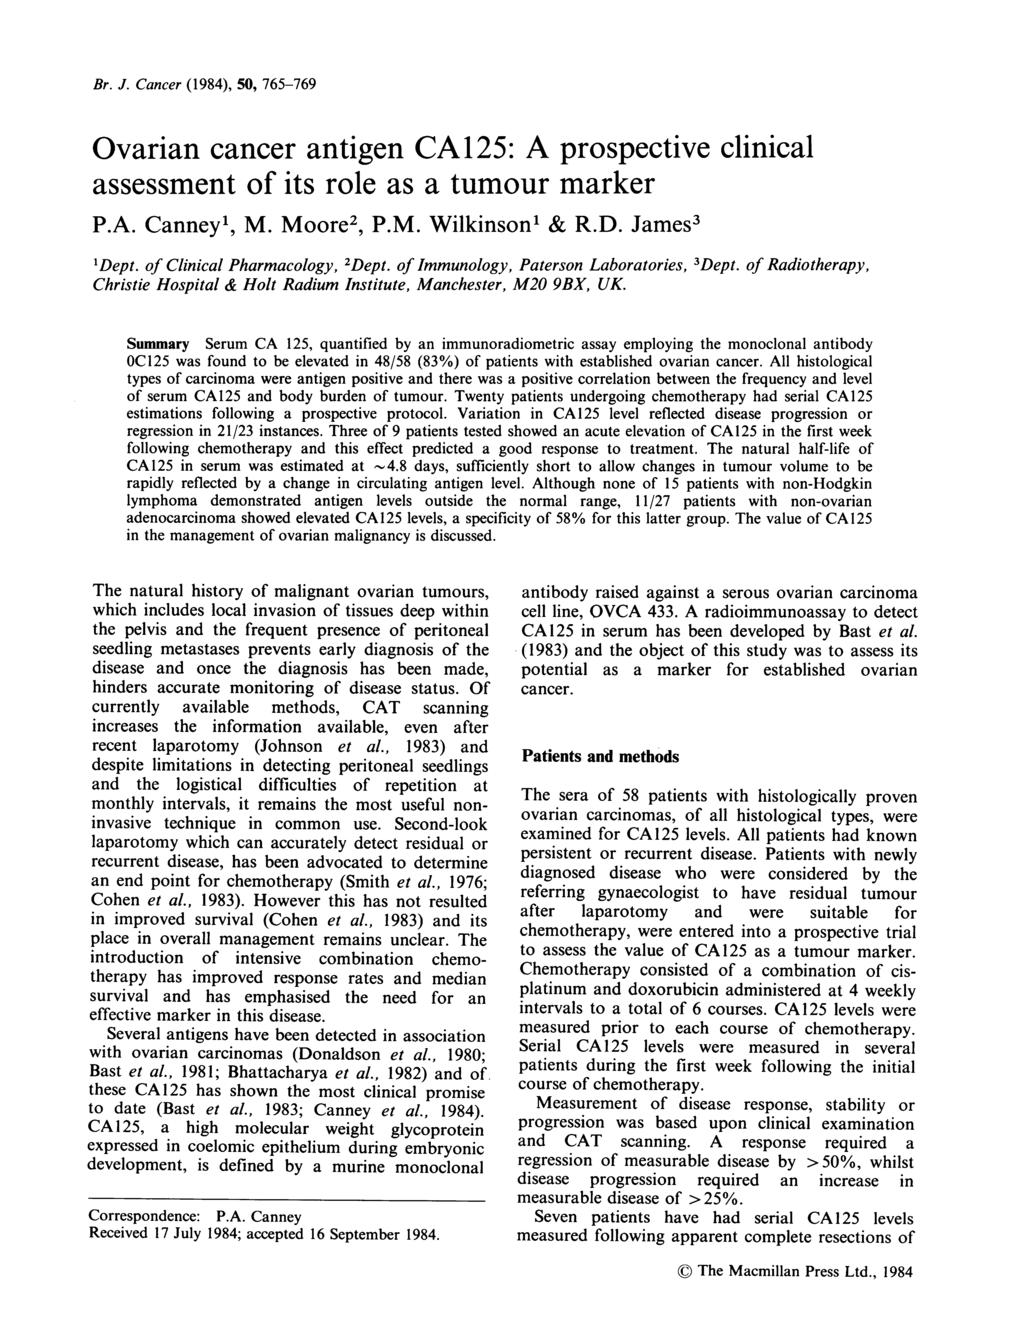 Br. J. Cancer (1984), 5, 765-769 Ovarian cancer antigen CA125: A prospective clinical assessment of its role as a tumour marker P.A. Canney', M. Moore2, P.M. Wilkinson' & R.D. James3 'Dept.